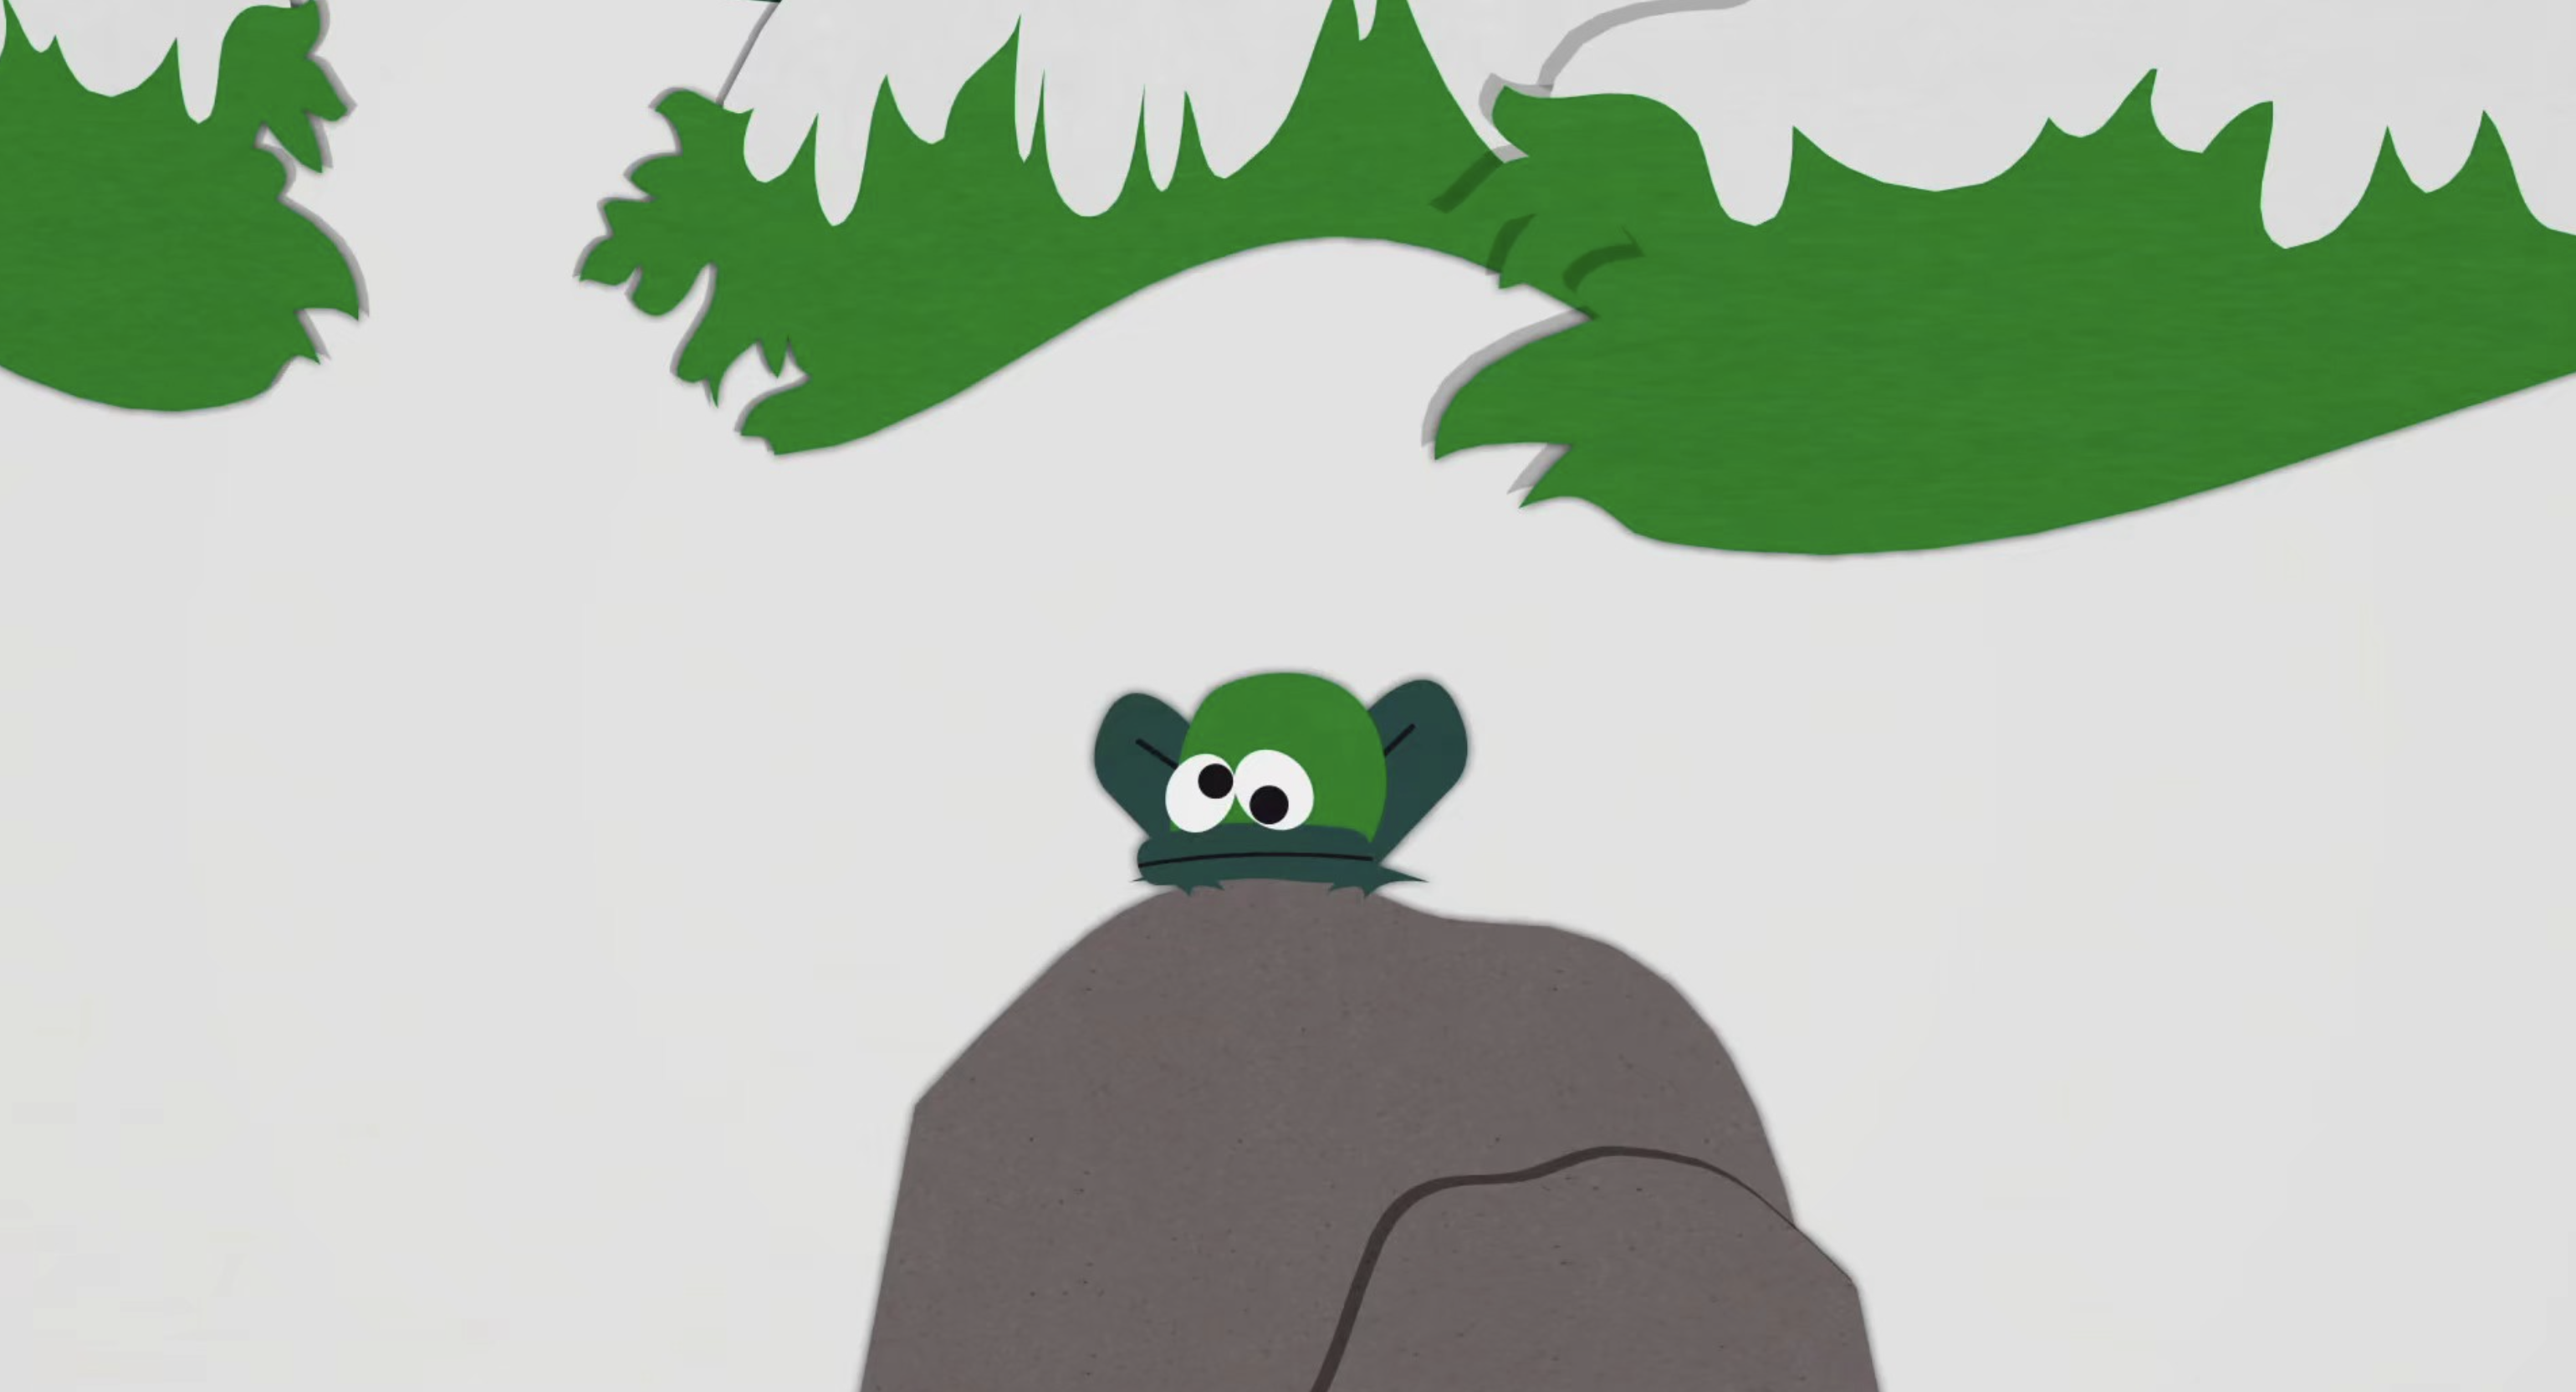 Goin’ Down to South Park Guide S 2 E 6 ‘The Mexican Staring Frog of Southern Sri Lanka’